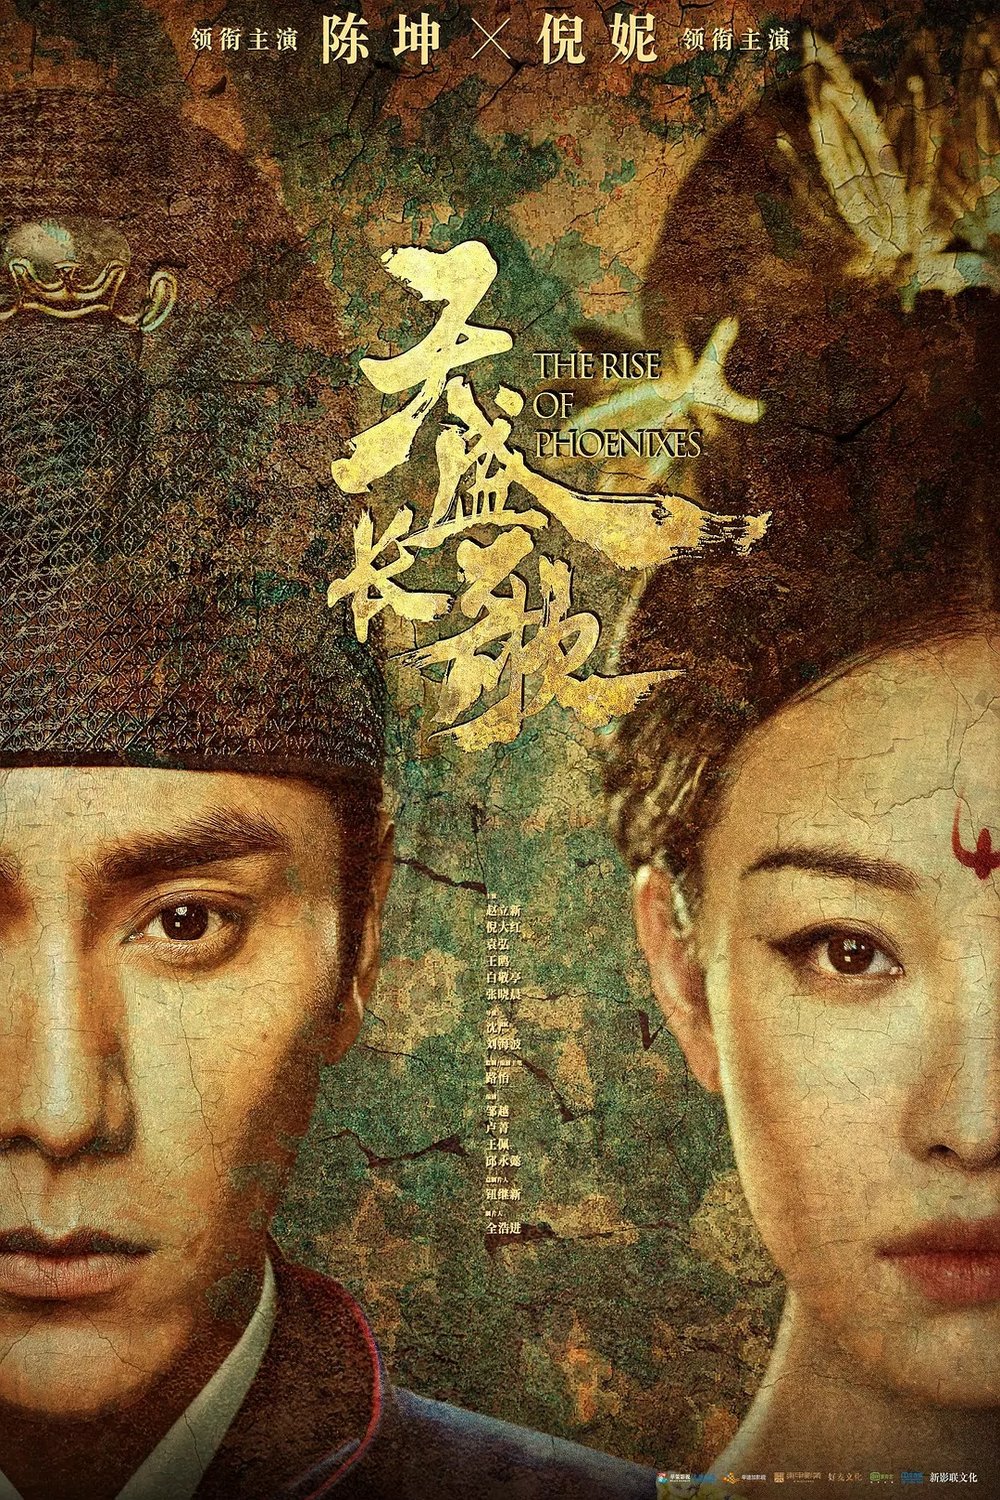 Mandarin poster of the movie The Rise of Phoenixes